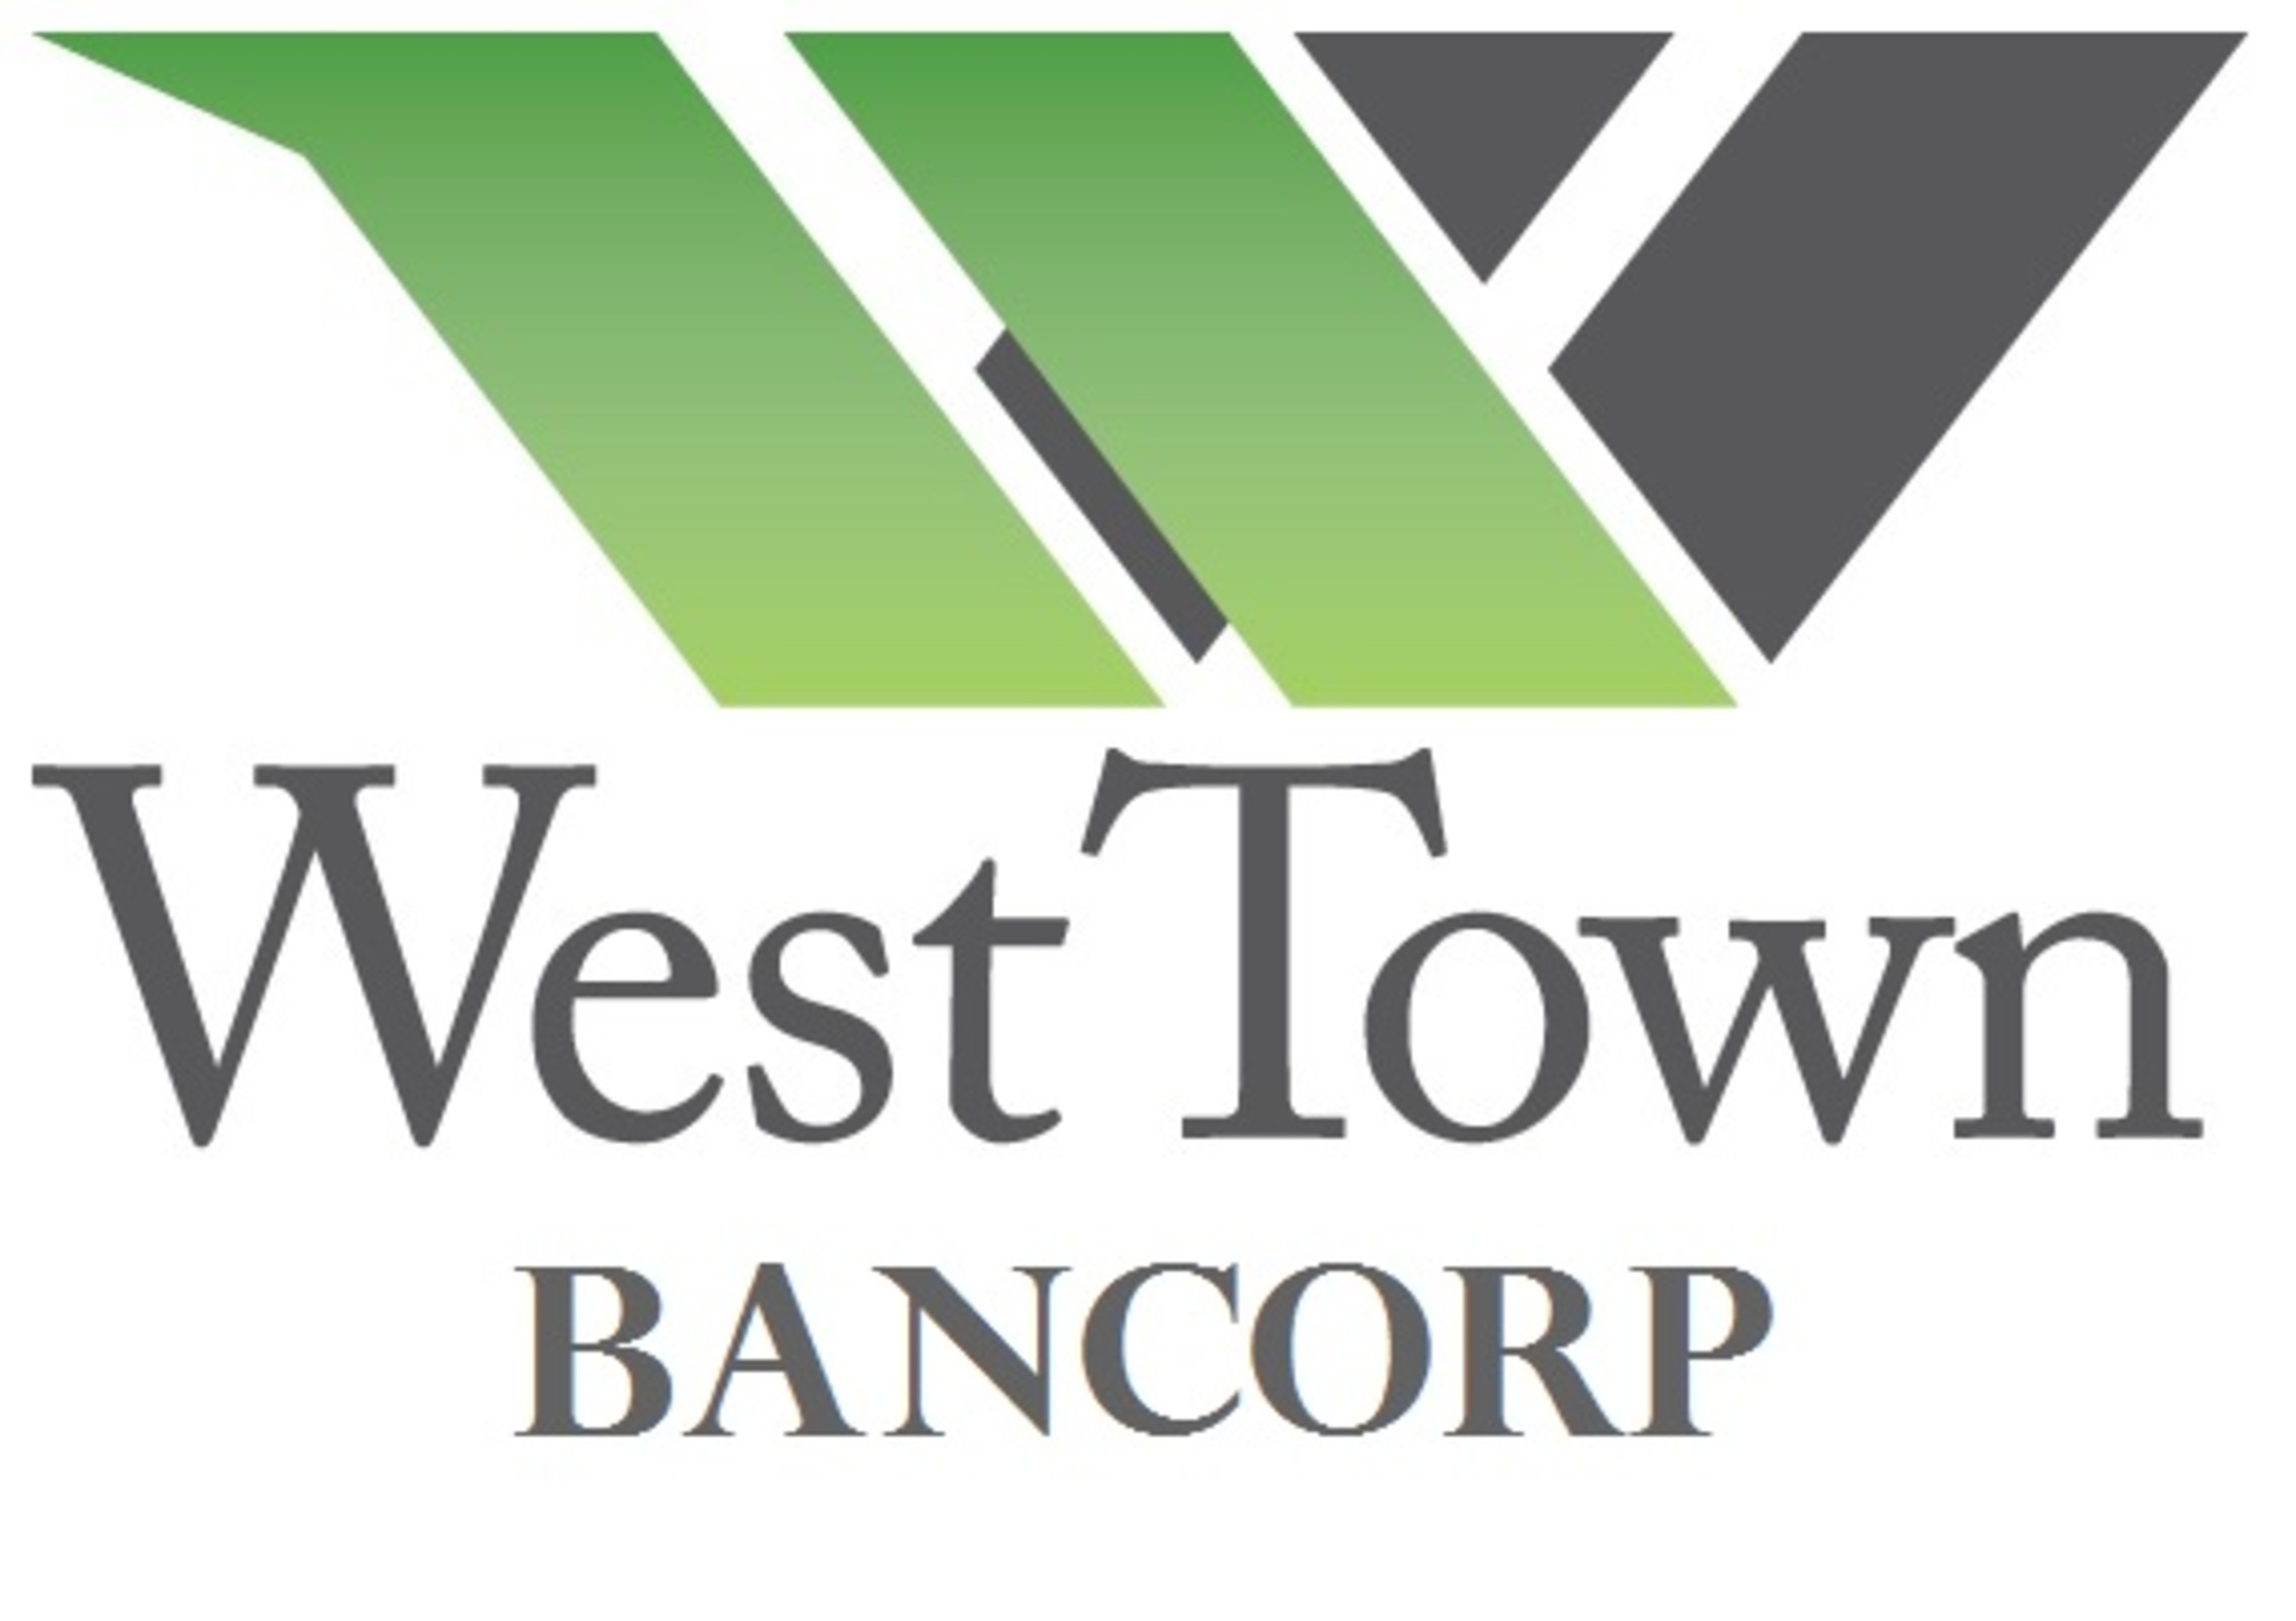 West Town Bank & Trust